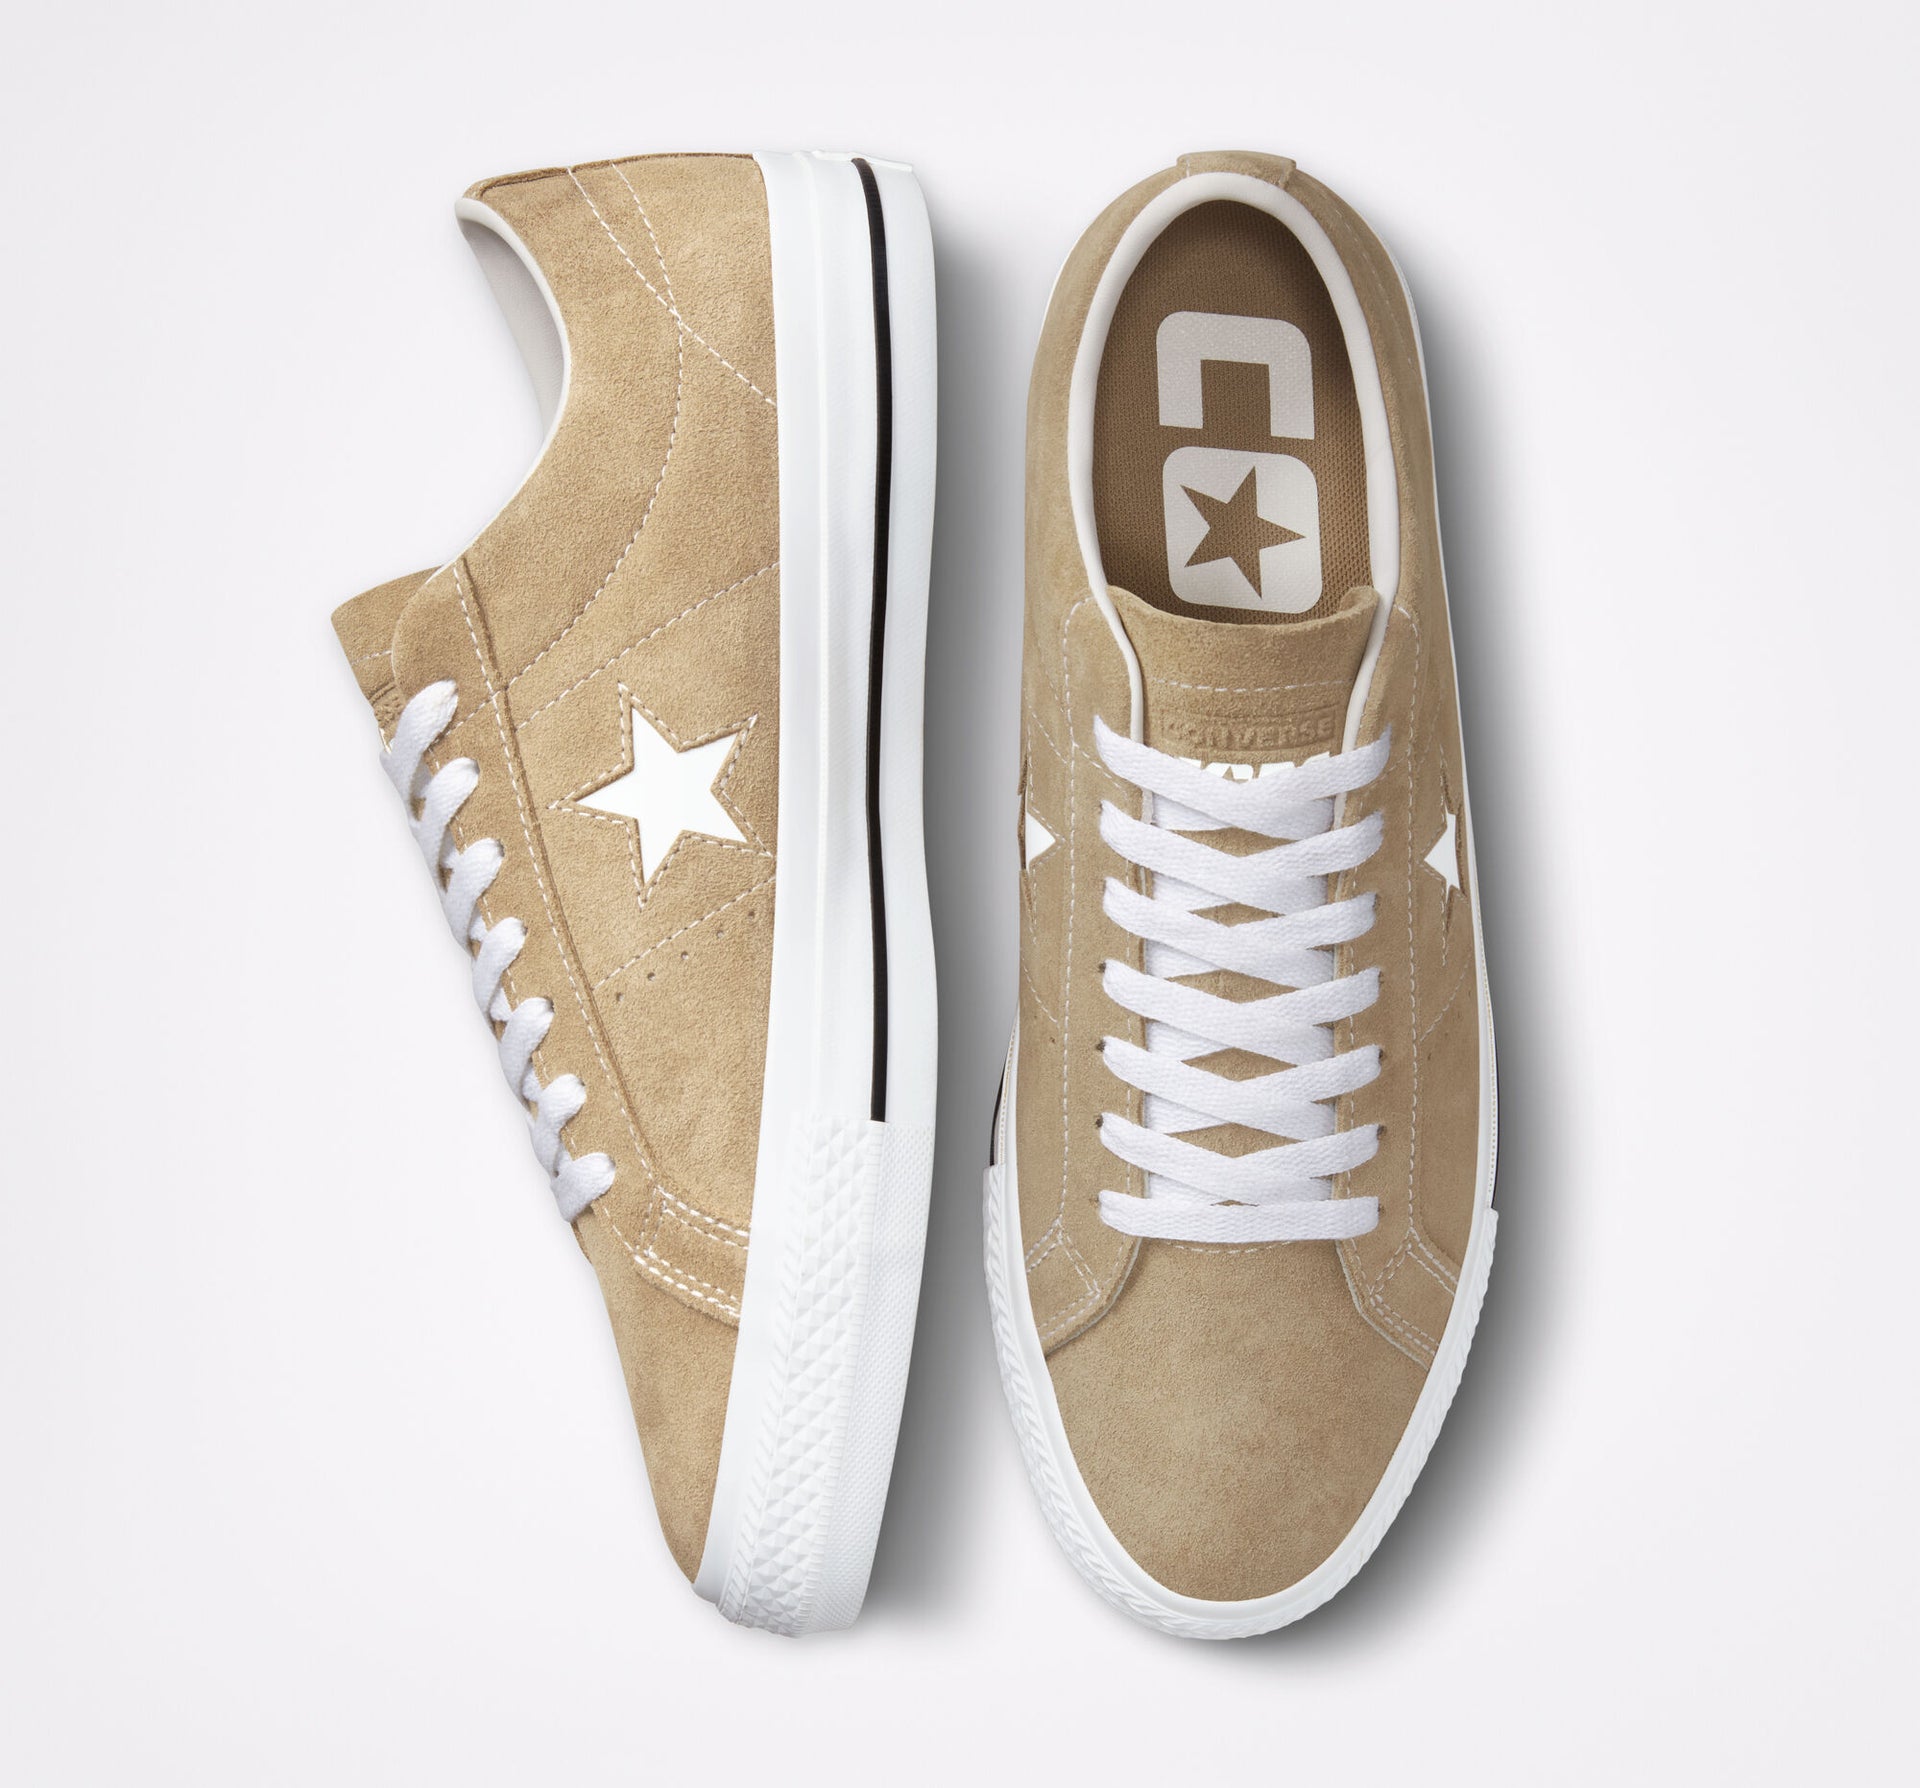 Converse Cons One Star Pro Suede NWSTORE